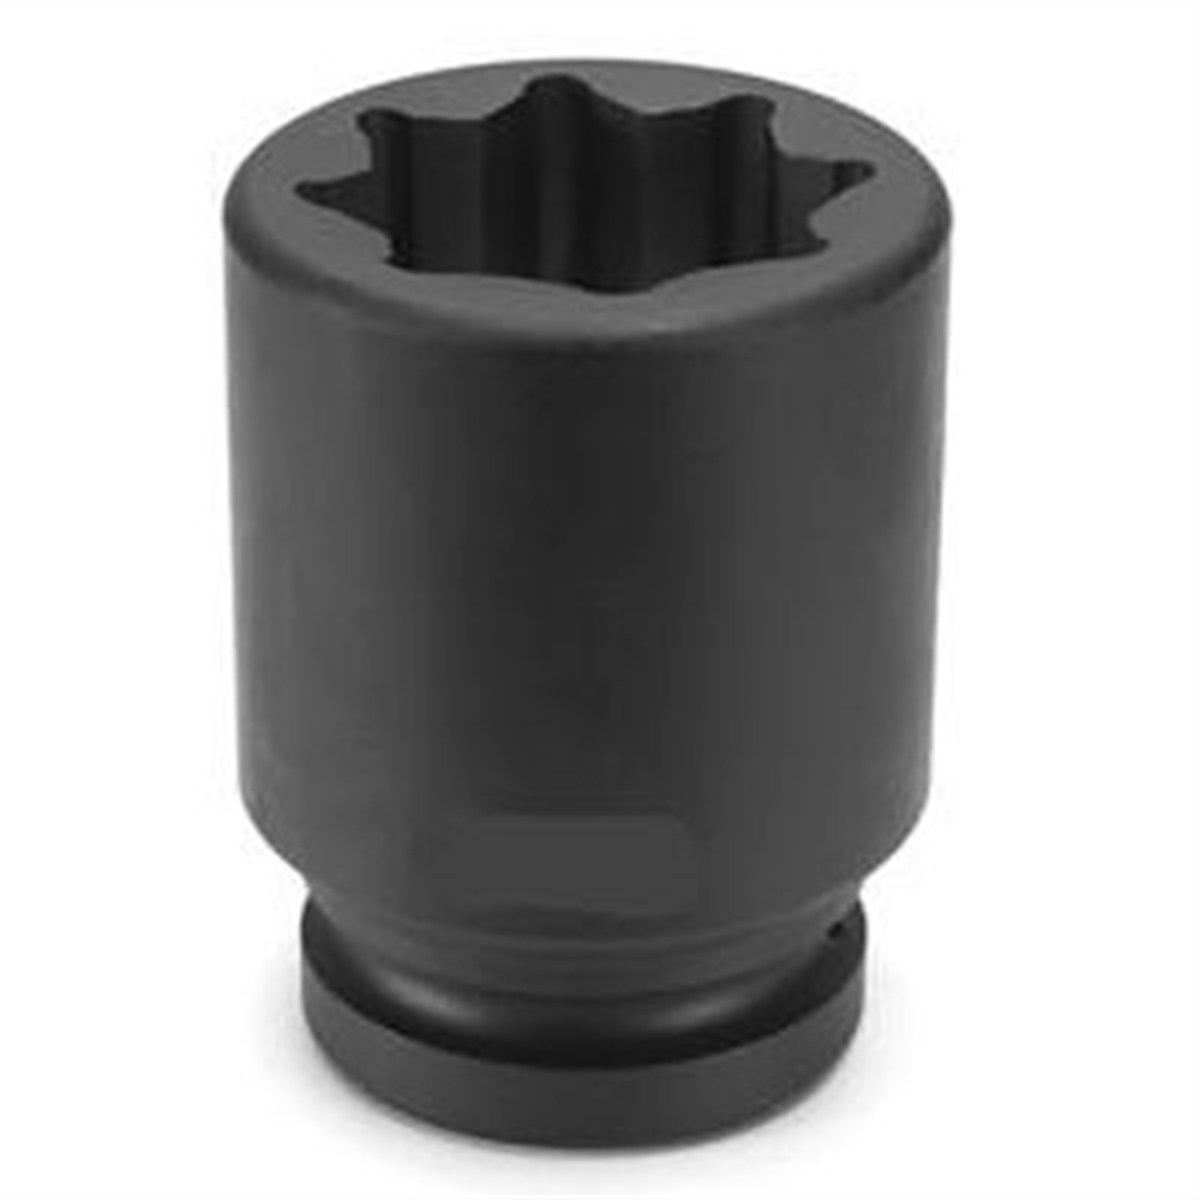 1 In Drive 8 Pt Double Square/Railroad Deep Impact Socket - 1-7/